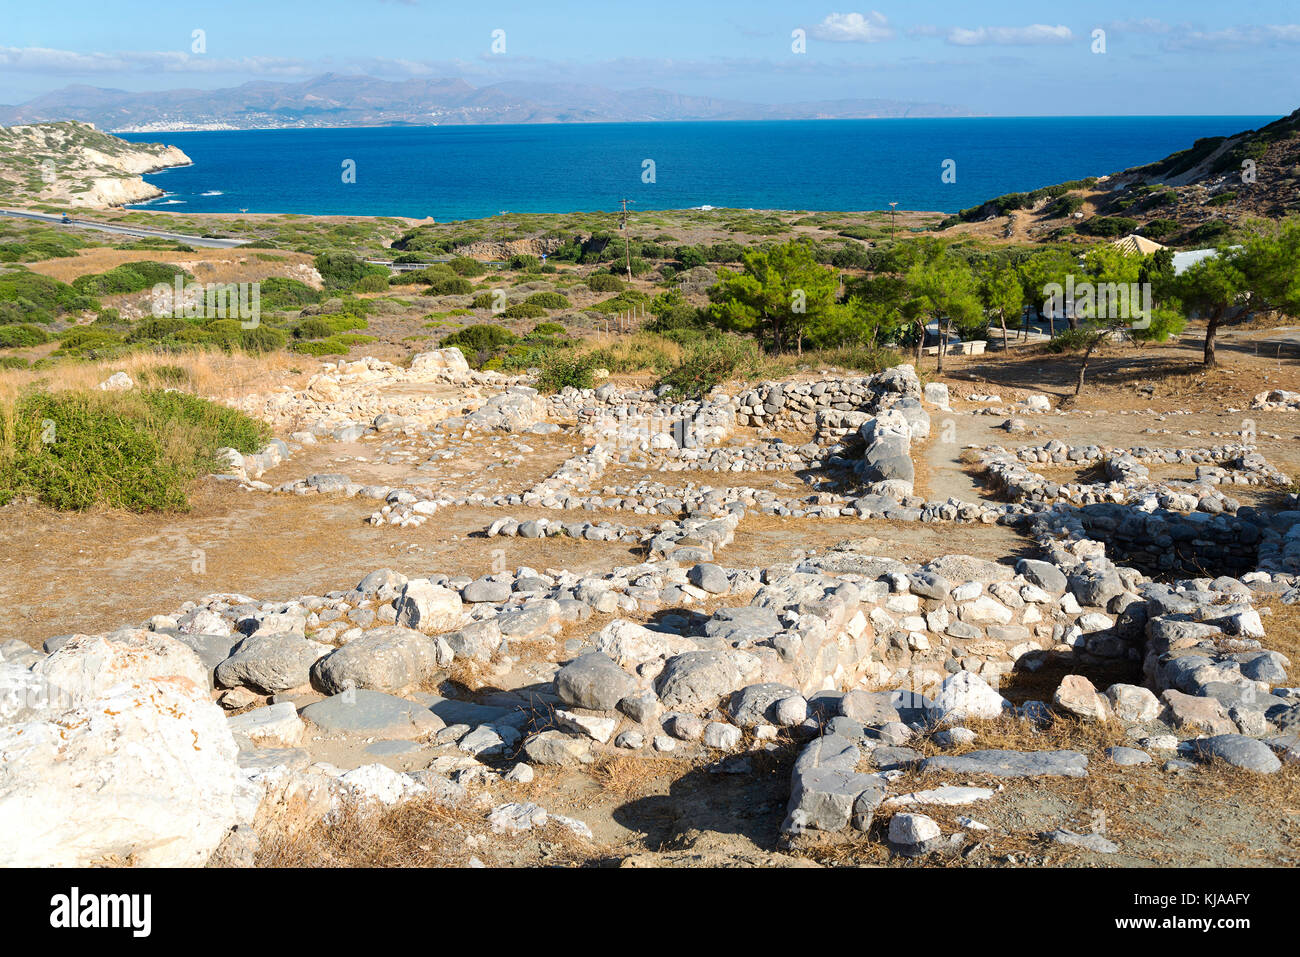 Remains of walls of buildings of the ancient people on the island of Crete. Stock Photo